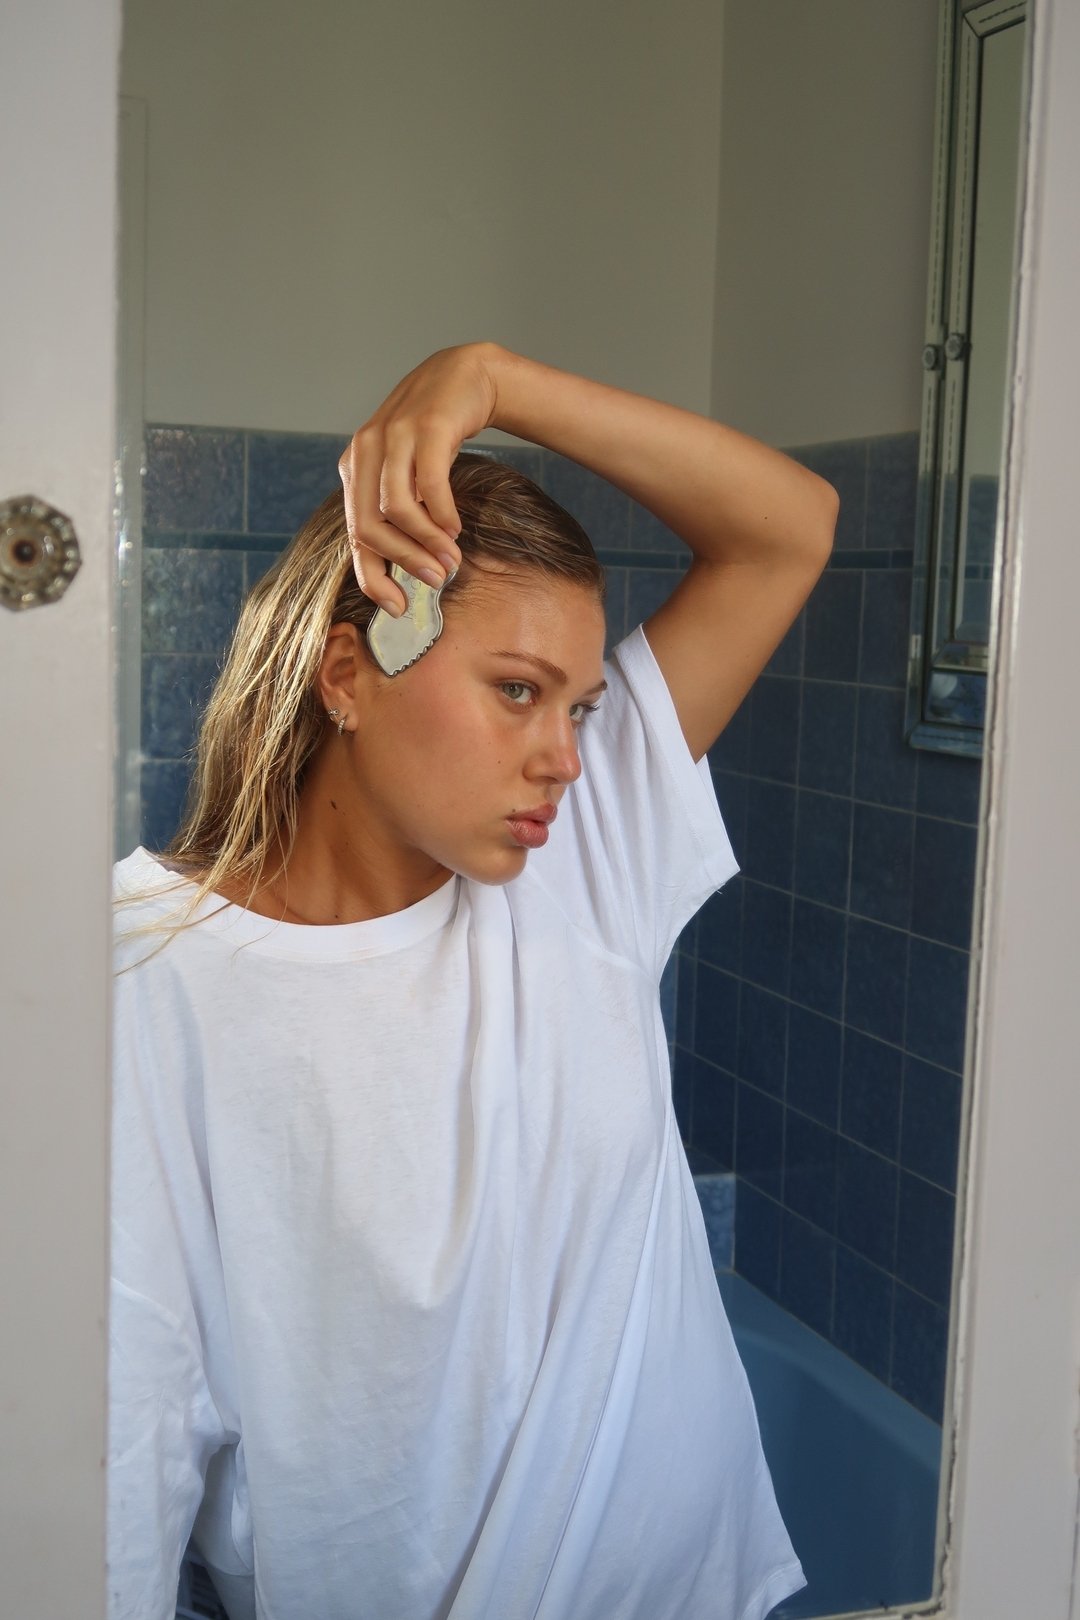 Amplify the absorption of your skin care products with our favourite stainless steel Gua Sha from @basecamp_beauty for a healthy, glowing and sculpted complexion.

Shop online or in clinic.